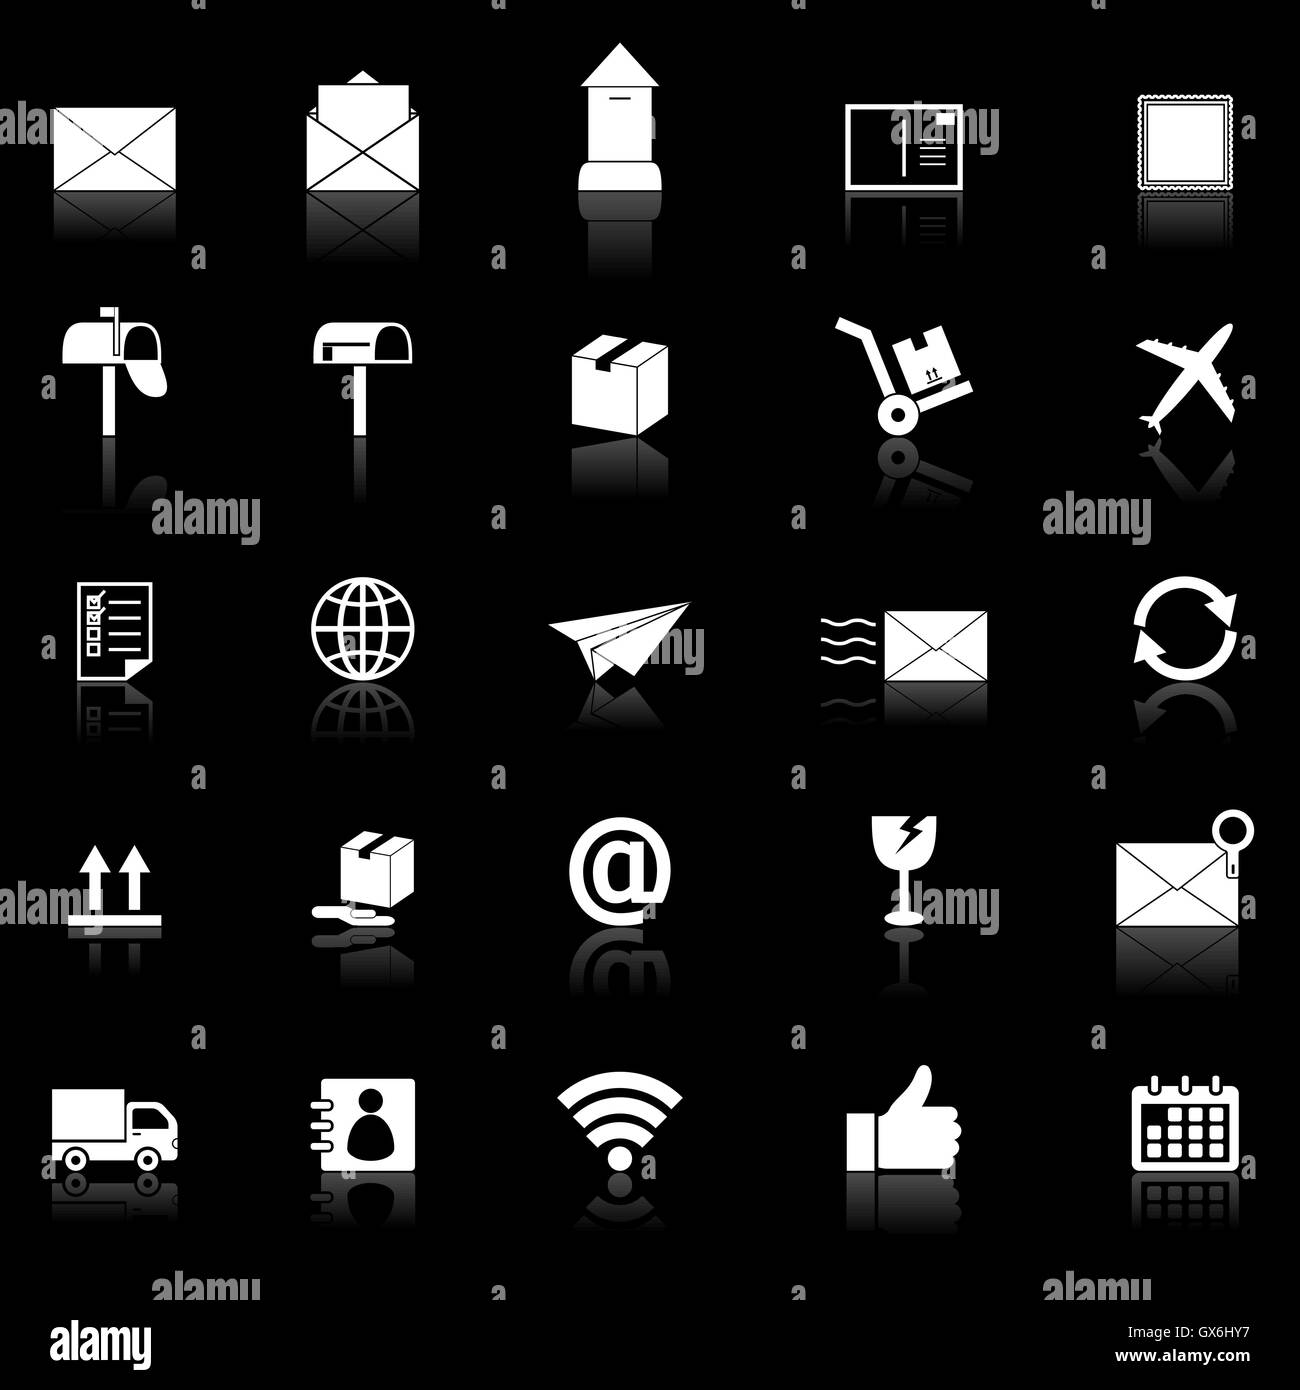 Post icons with reflect on black background, stock vector Stock Vector